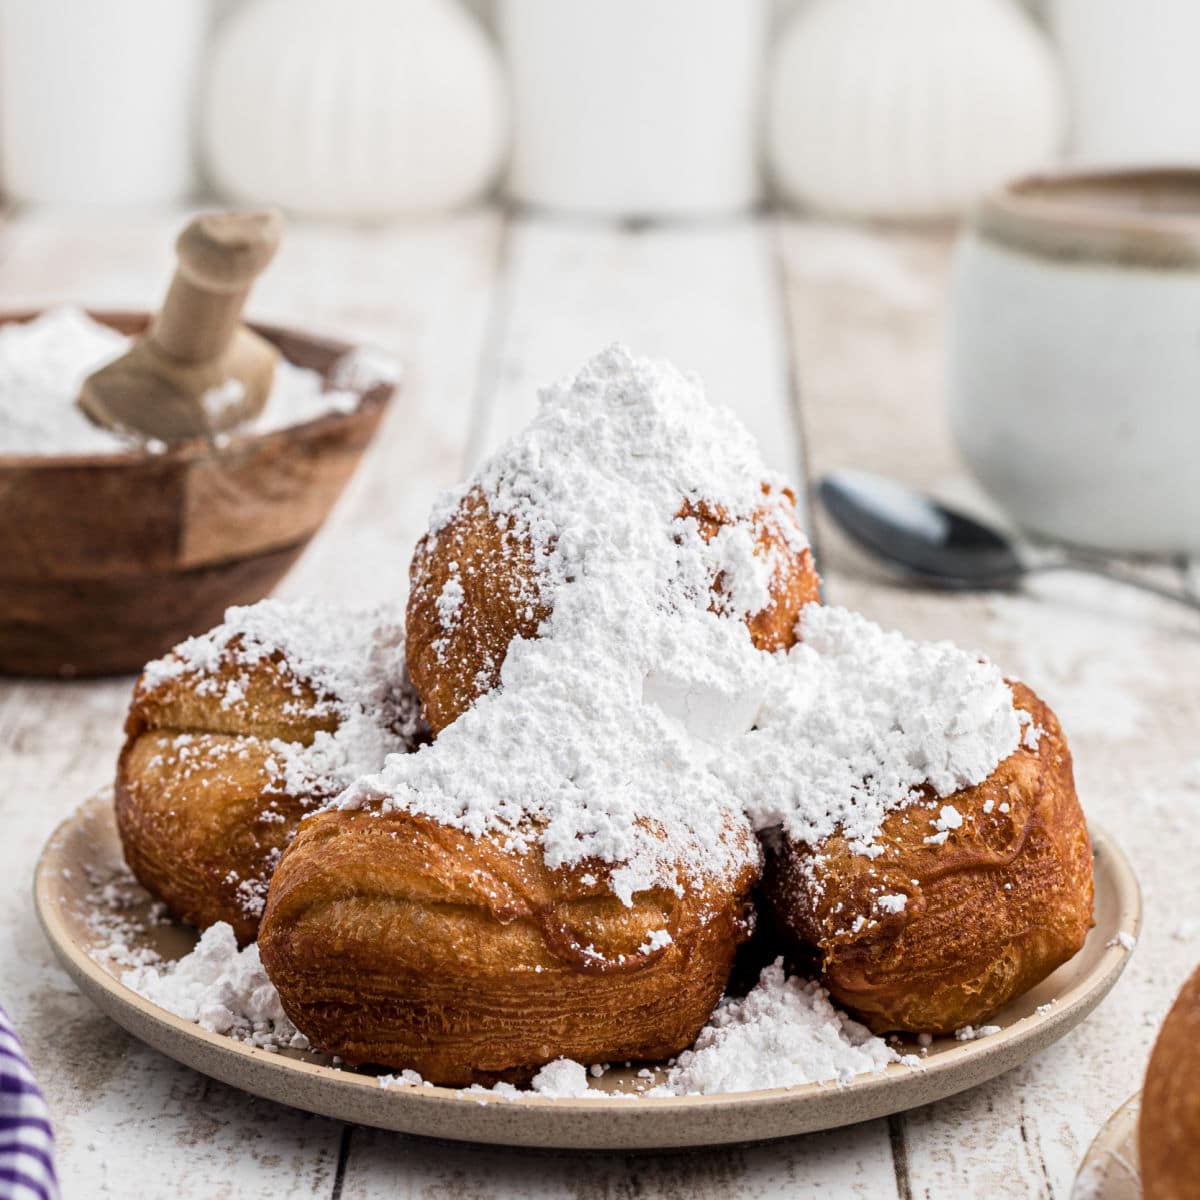 a close up image of biscuit beignets on a plate heaped high with powdered sugar